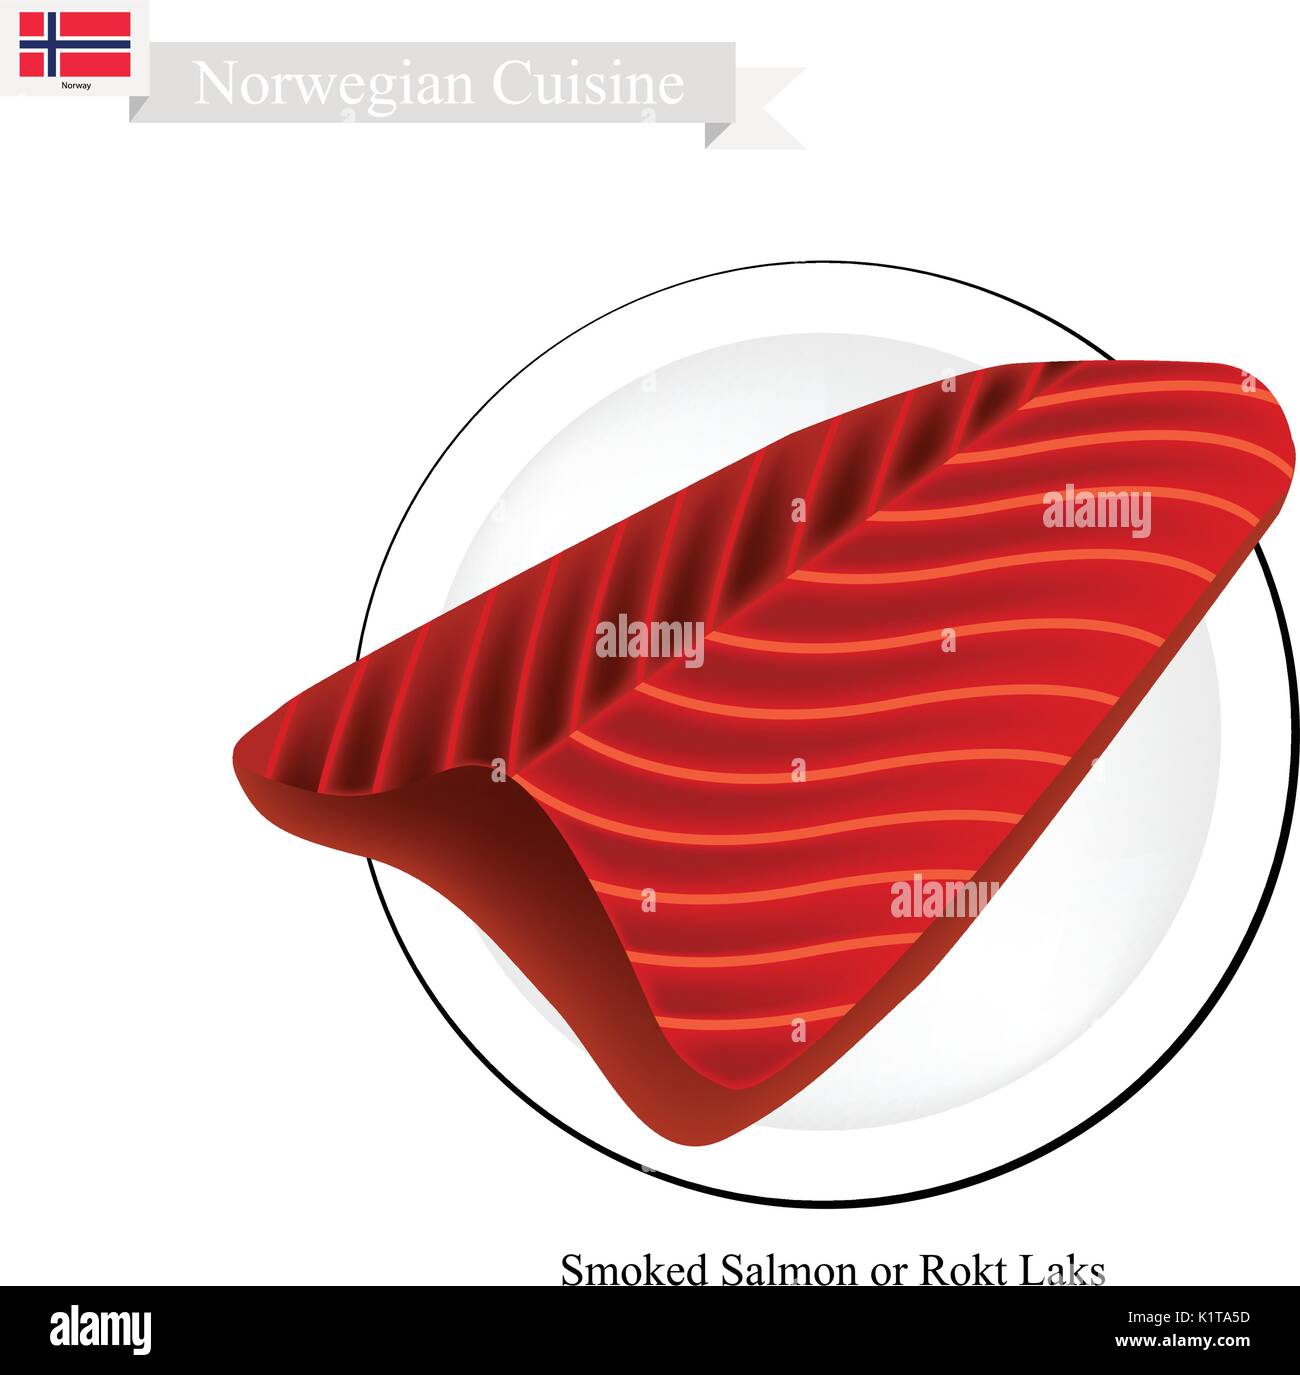 Norwegian Cuisine, Rokt Laks or Traditional Smoked Salmon. One of The Most Famous Food in Norway. Stock Vector